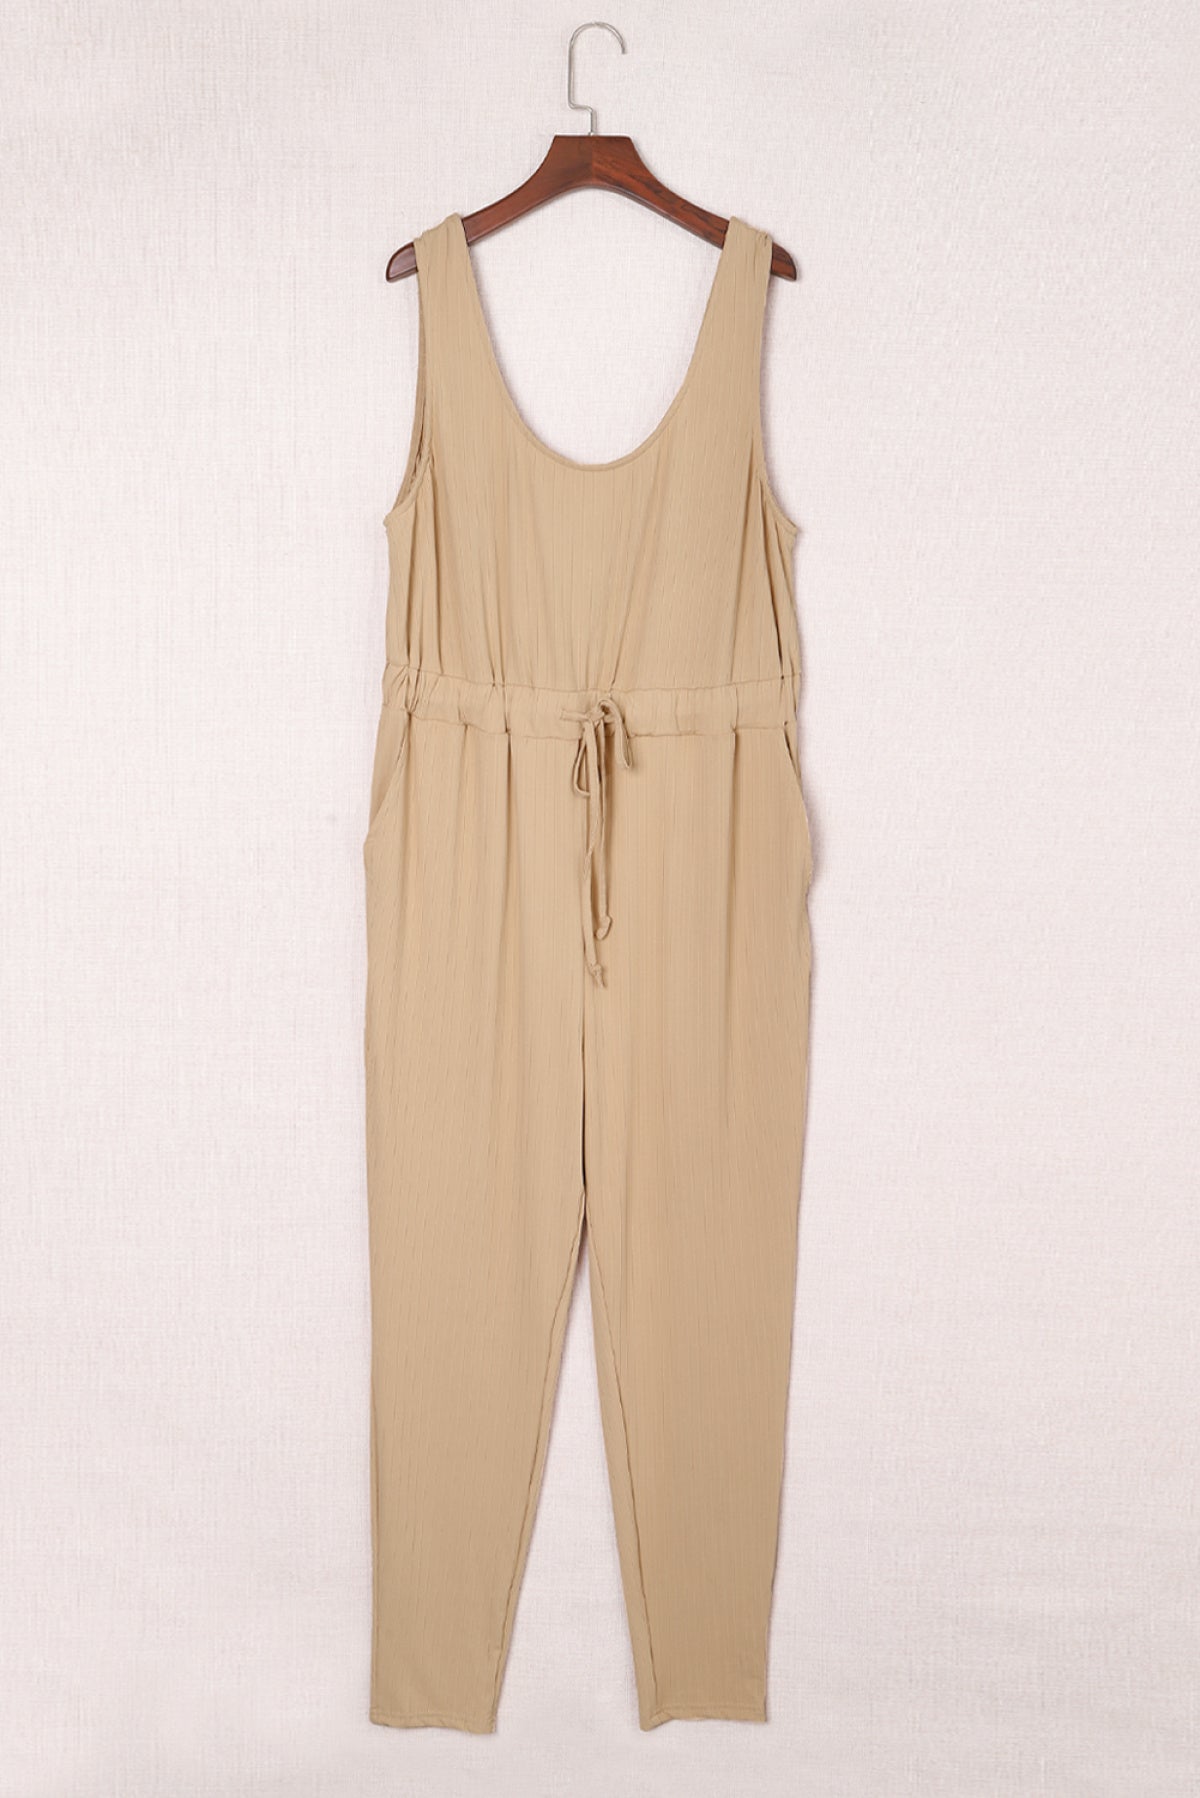 Apricot Ribbed Drawstring Waist Plus Size Sleeveless Jumpsuit | Art in Aging